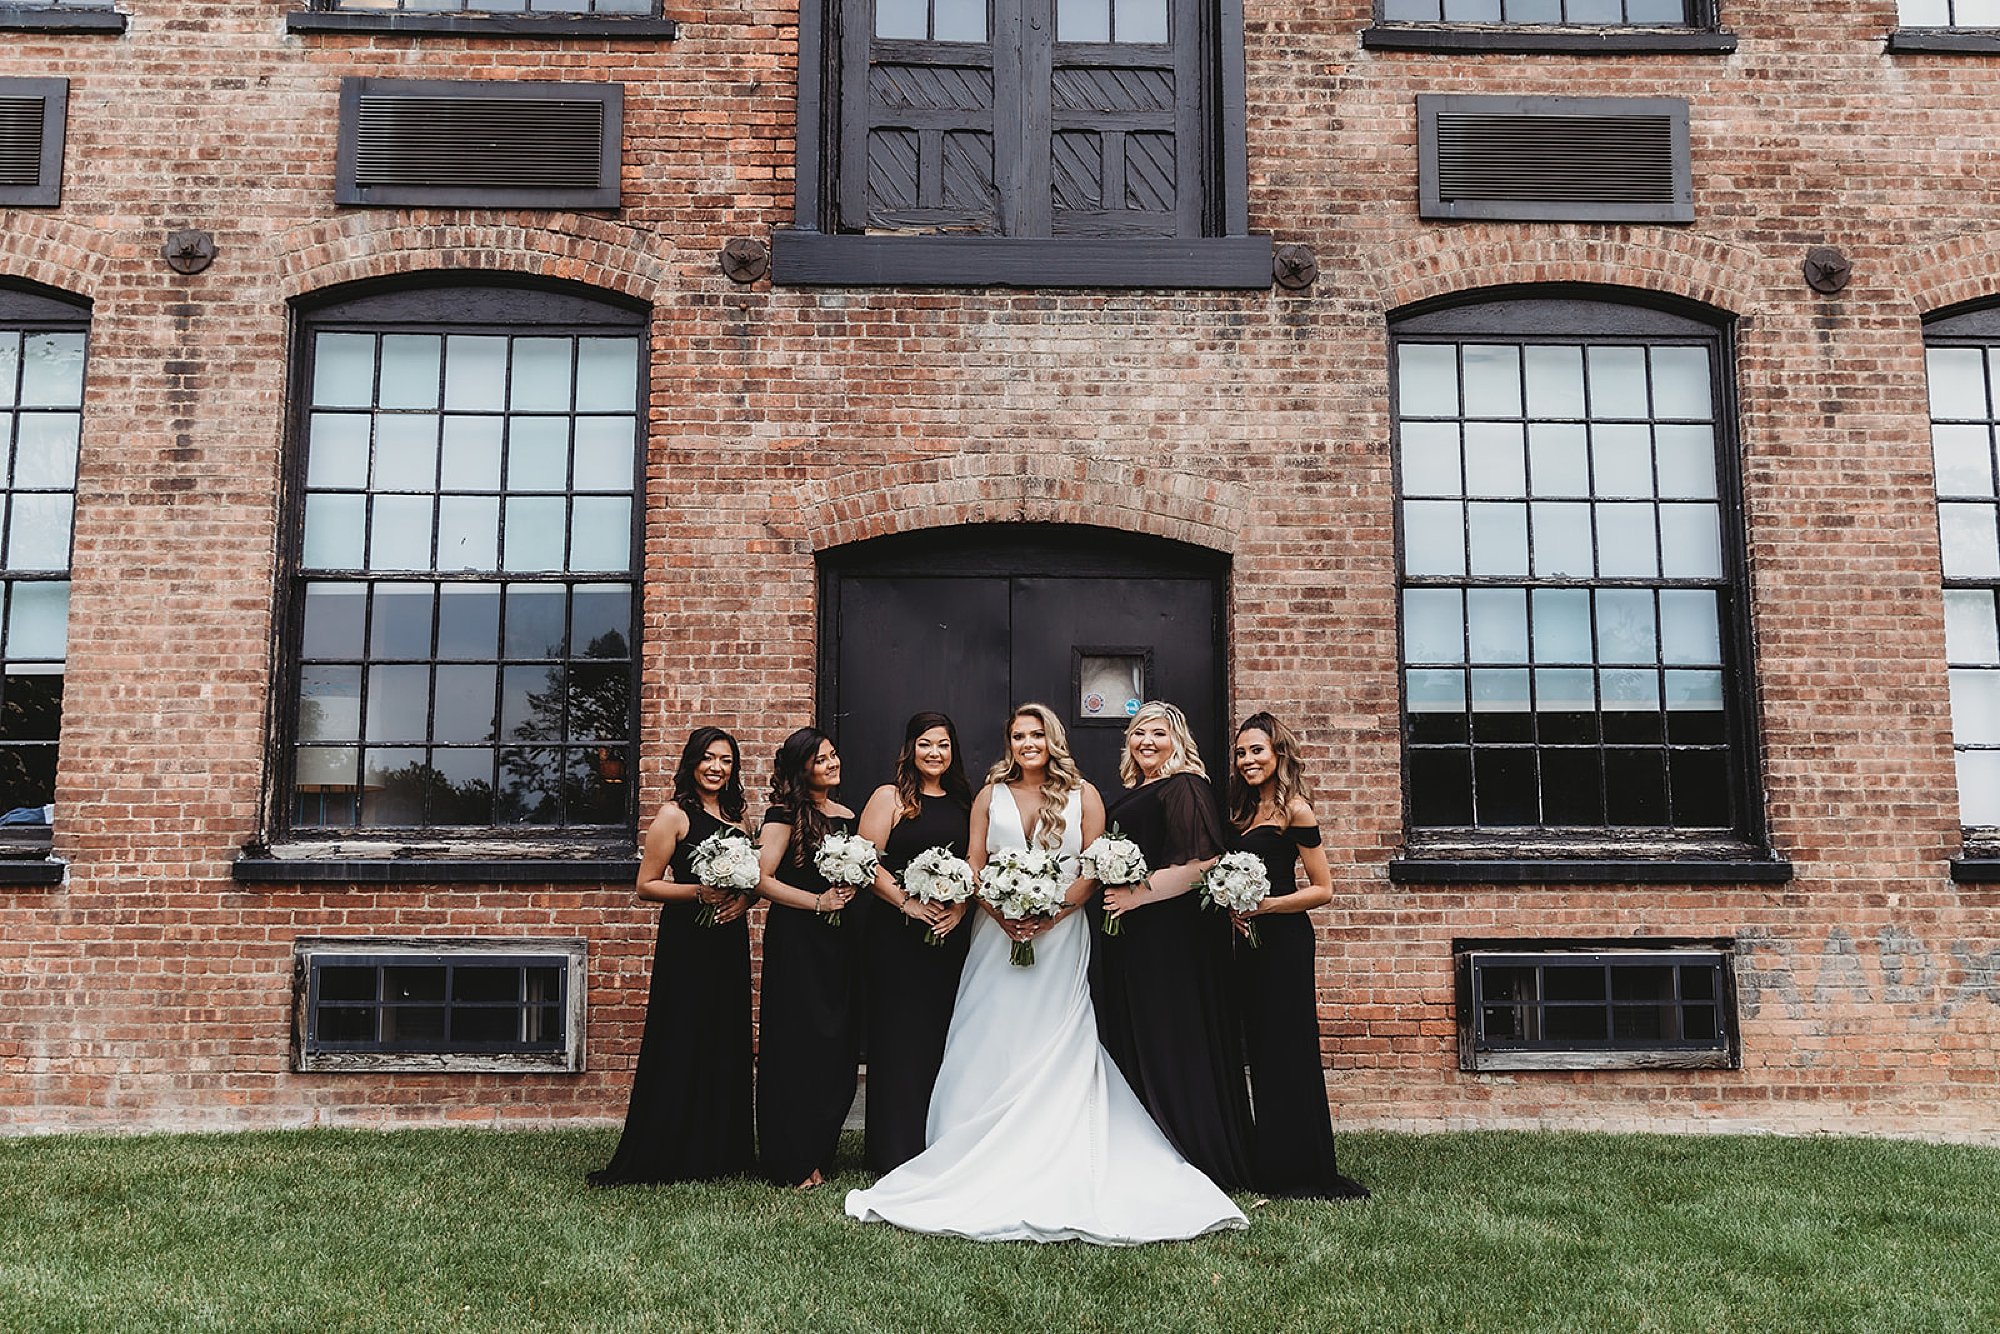 bride poses with bridesmaids in black gowns by brick building at The Roadhouse